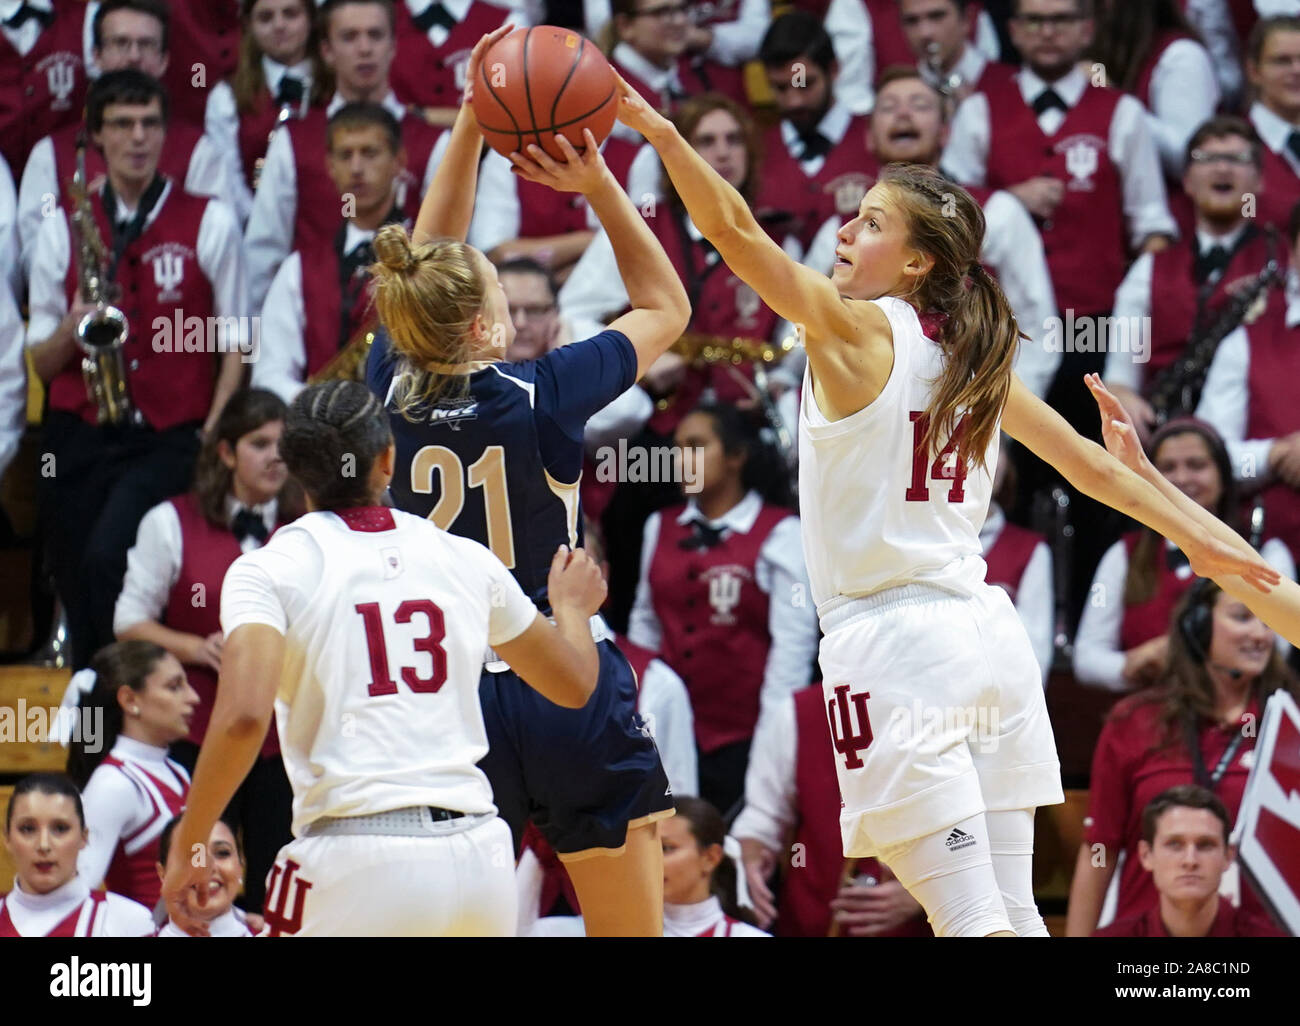 Bloomington, United States. 07th Nov, 2019. Indiana Hoosiers Ali Patberg (14) plays against Mt. St. Mary's Kayla Agentowicz (21) during the NCAA Women's College Basketball game at Simon Skjodt Assembly Hall in Bloomington. (Final Score; Indiana University 75:52 Mt. St. Mary's) Credit: SOPA Images Limited/Alamy Live News Stock Photo